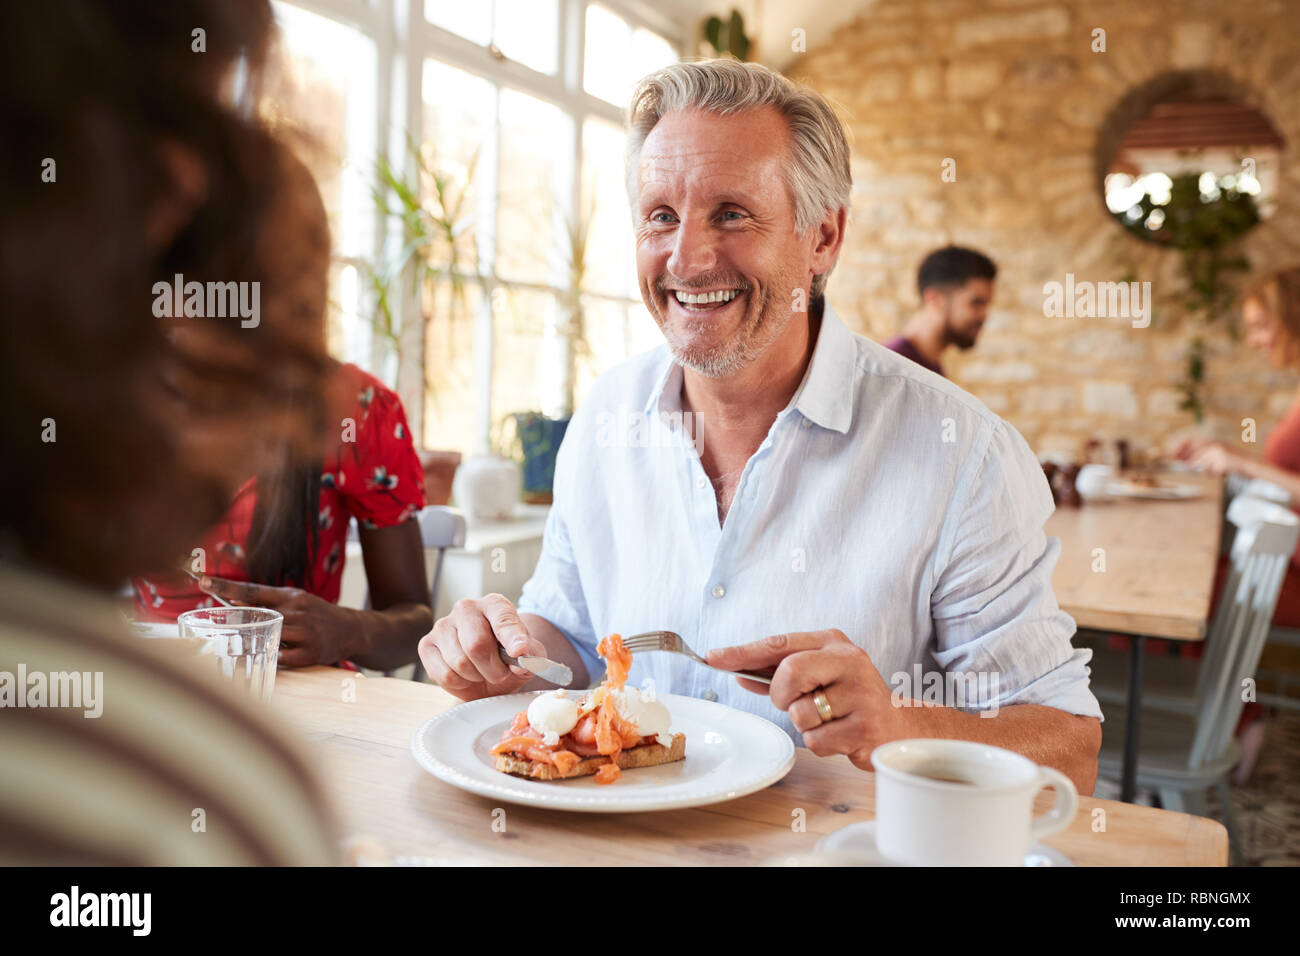 Happy senior white man eating brunch with friends at a cafe Stock Photo